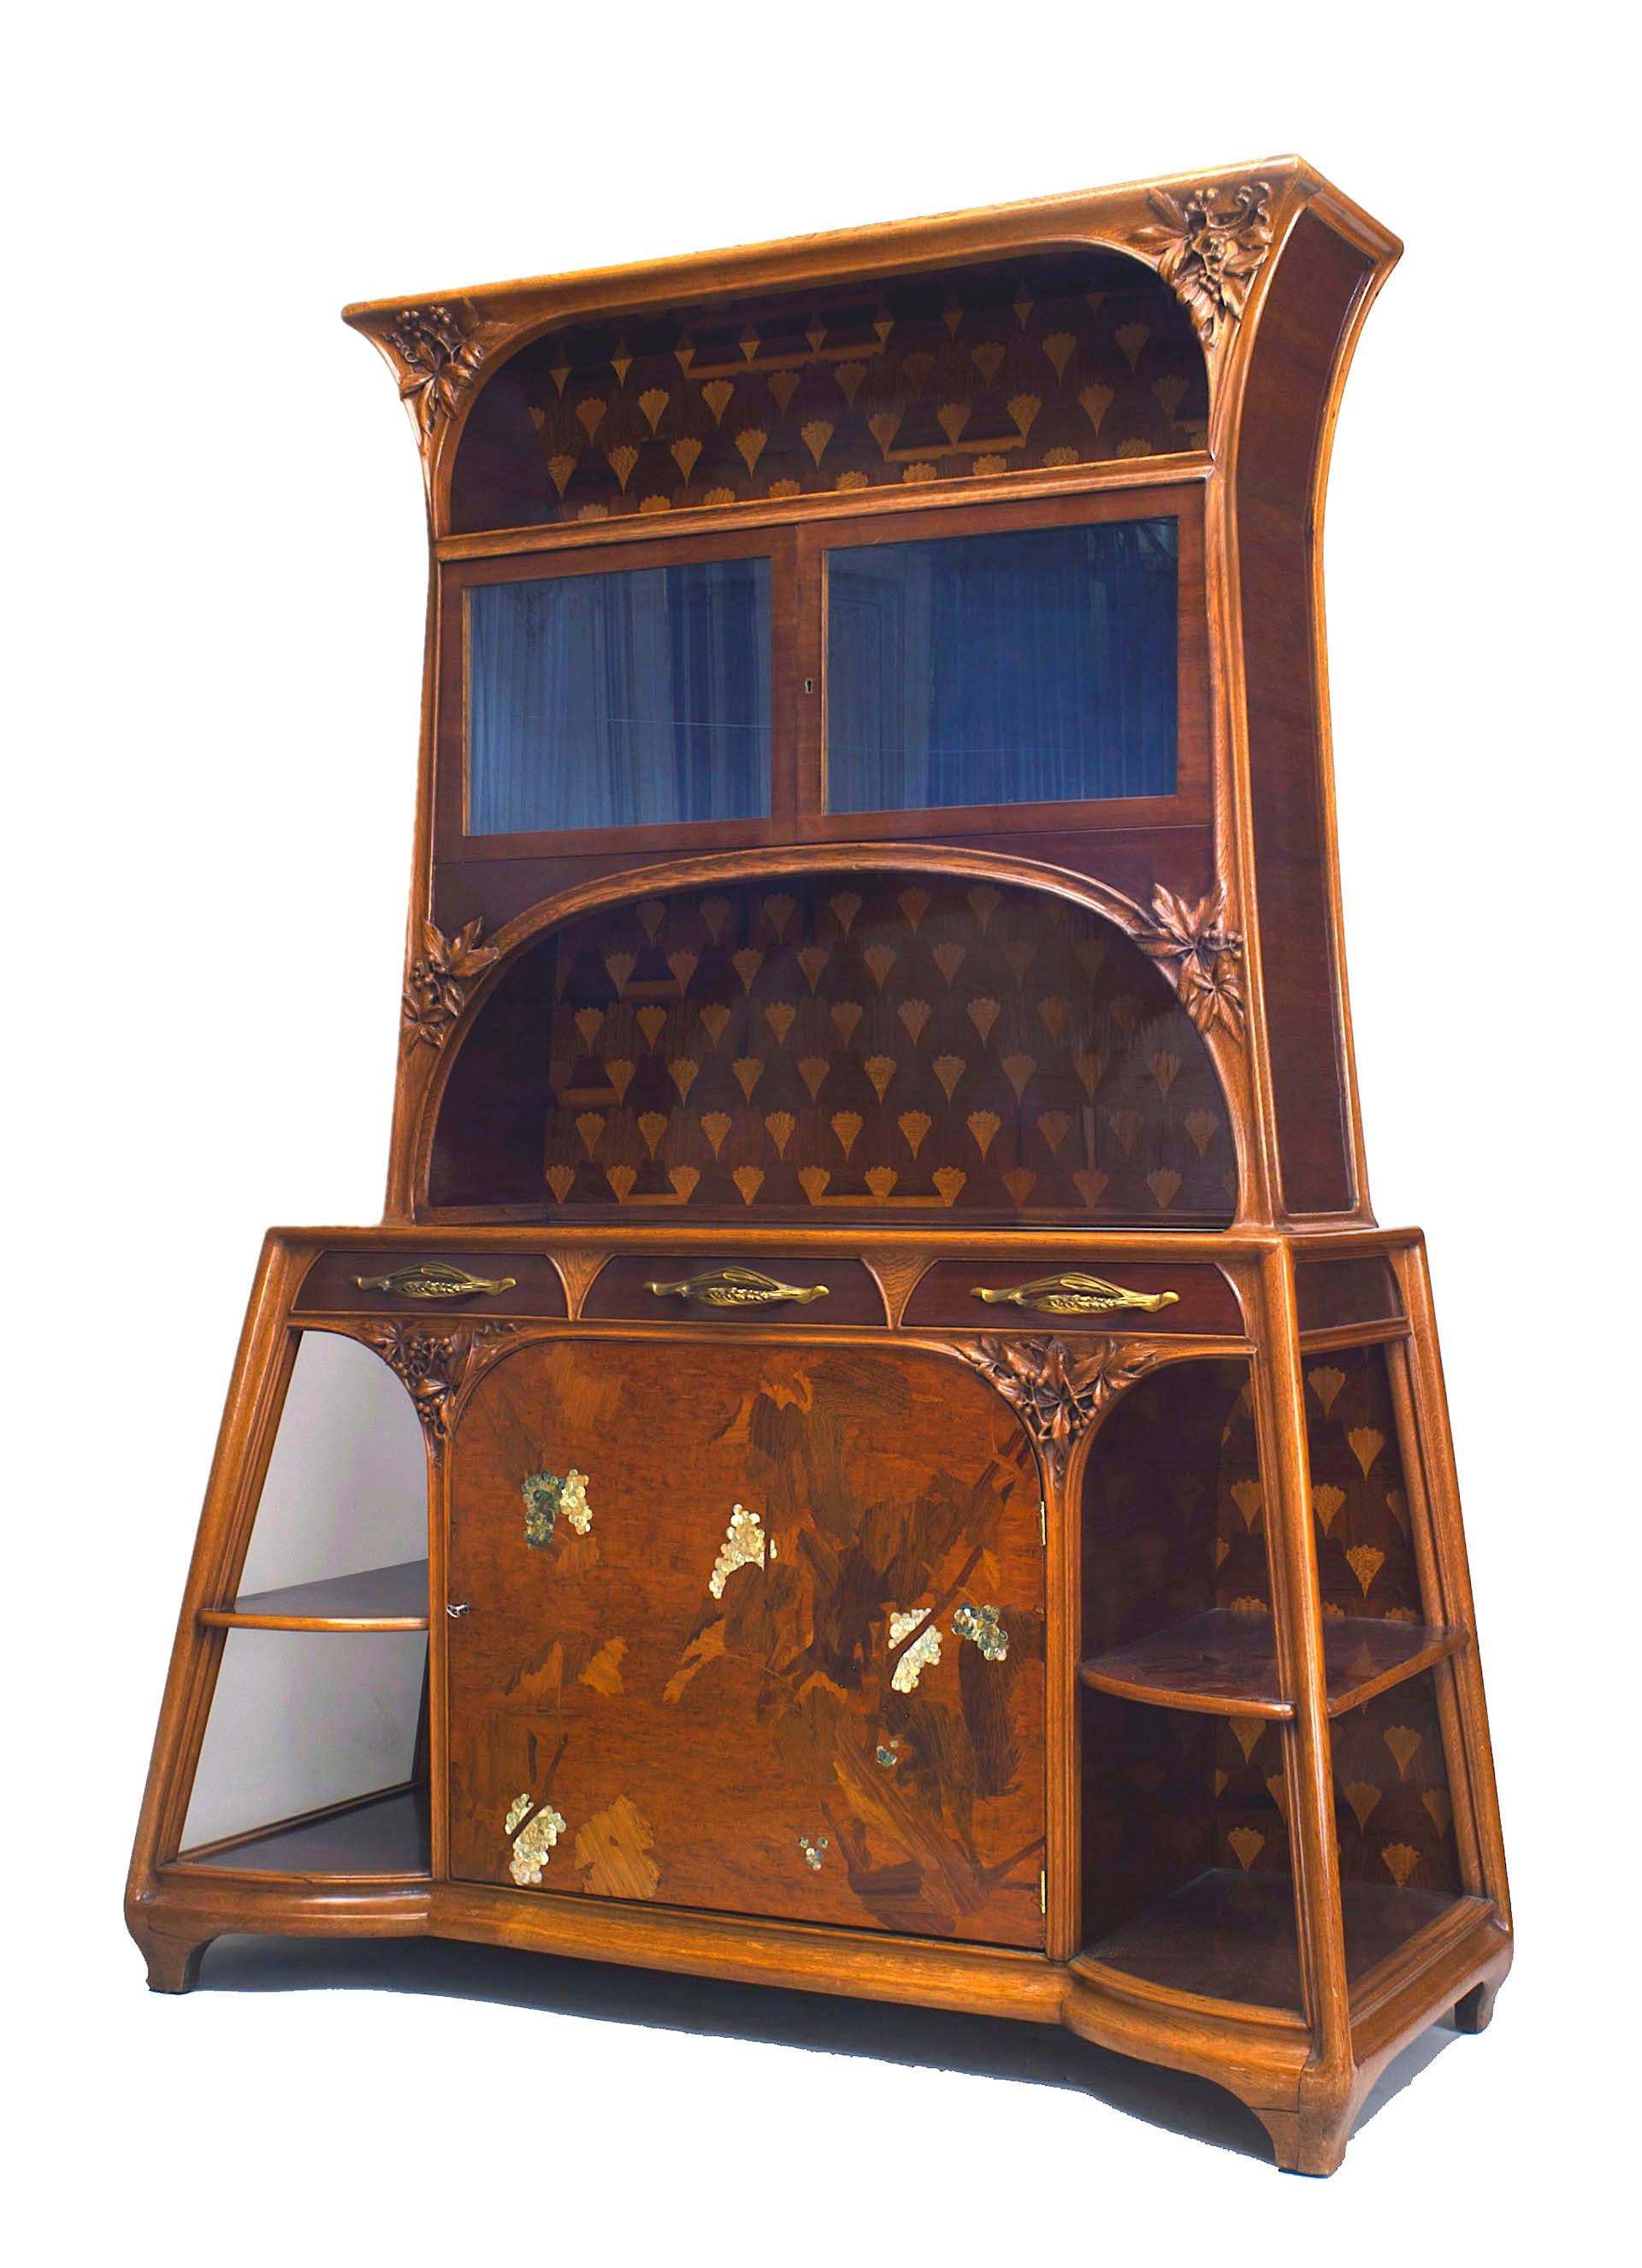 French Art Nouveau mahogany & walnut cupboard cabinet with floral inlay and carving and bronze drawer handles with 2 glass door upper structure (signed MAJORELLE)
